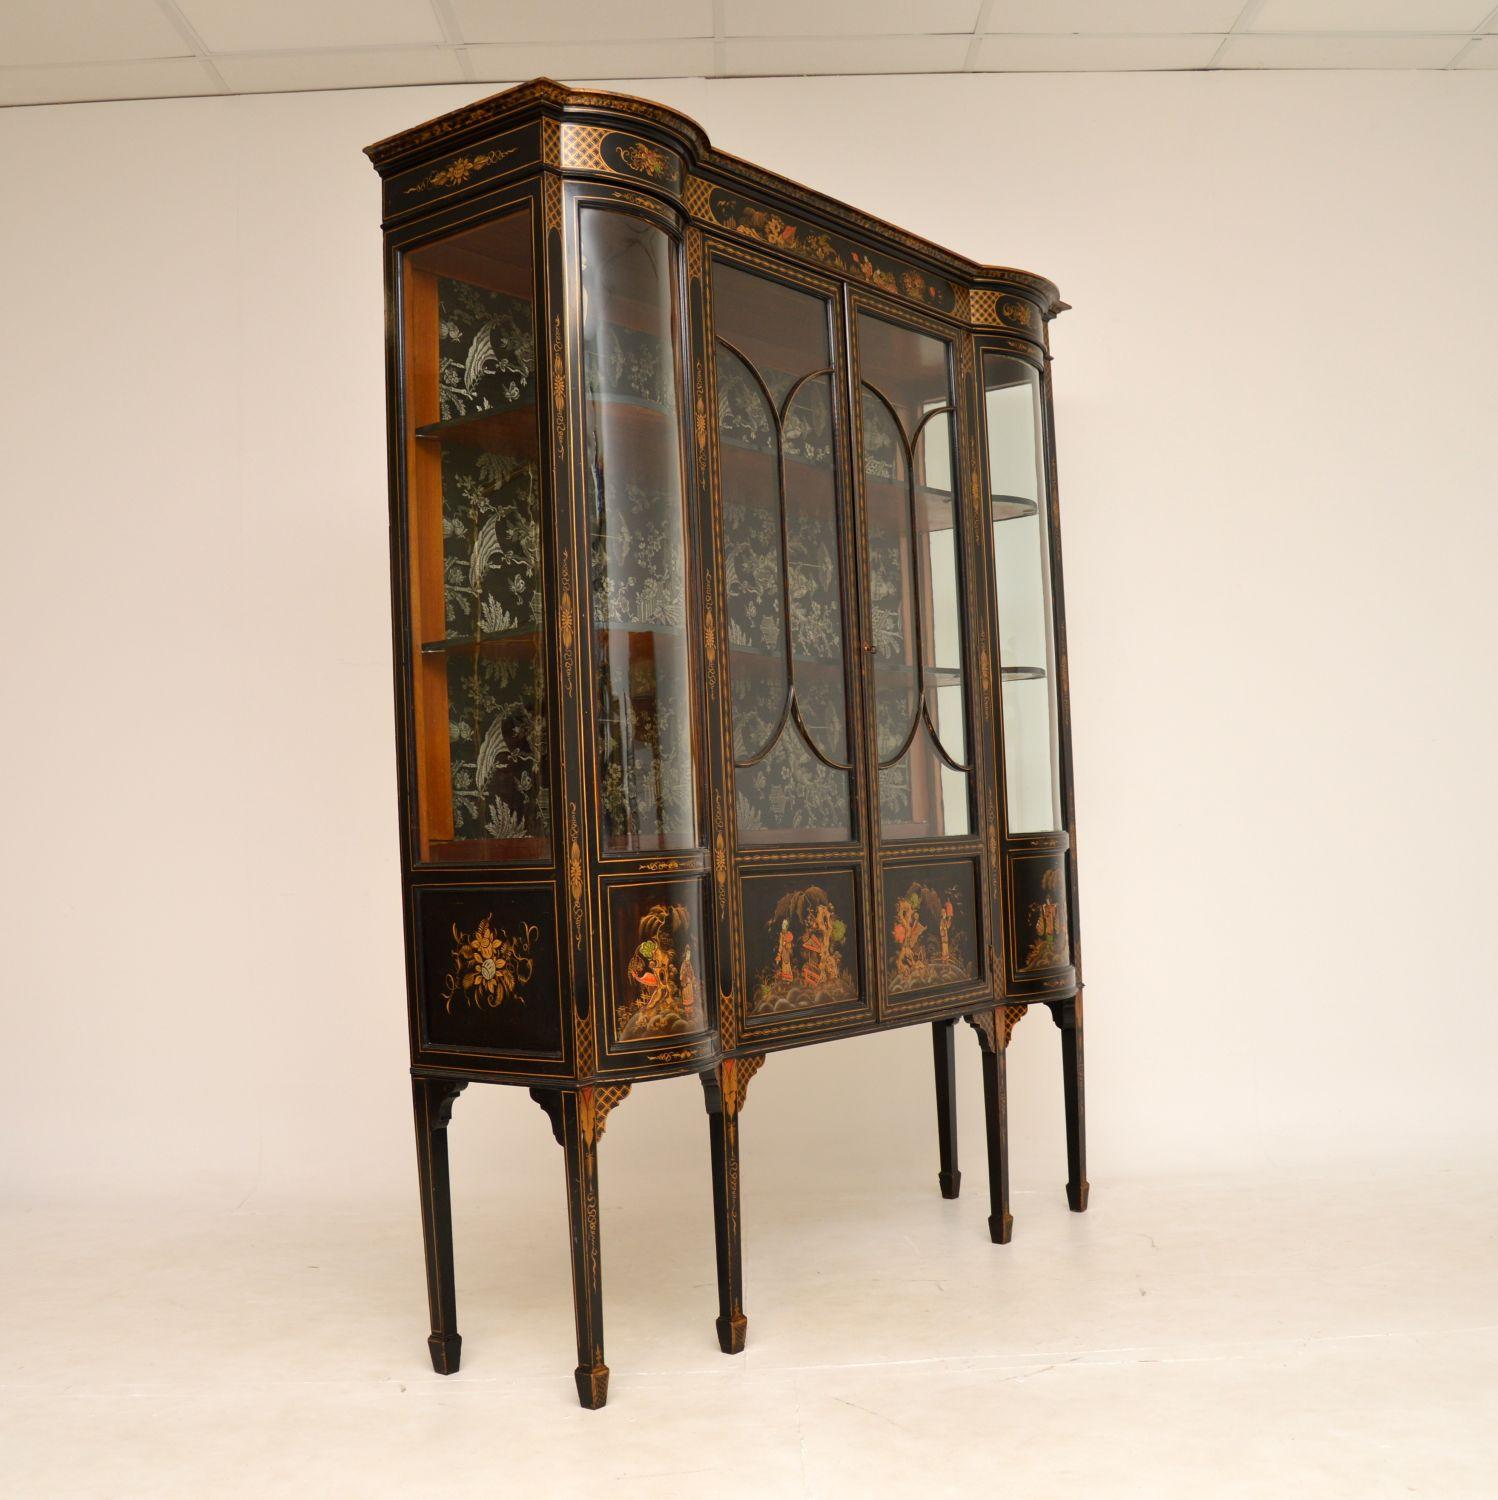 A magnificent antique lacquered chinoiserie display cabinet. This was made in England, it dates from around the 1900-1910 period.

It is absolutely beautiful, with incredible hand painted decorations throughout in the Chinese style. The quality is